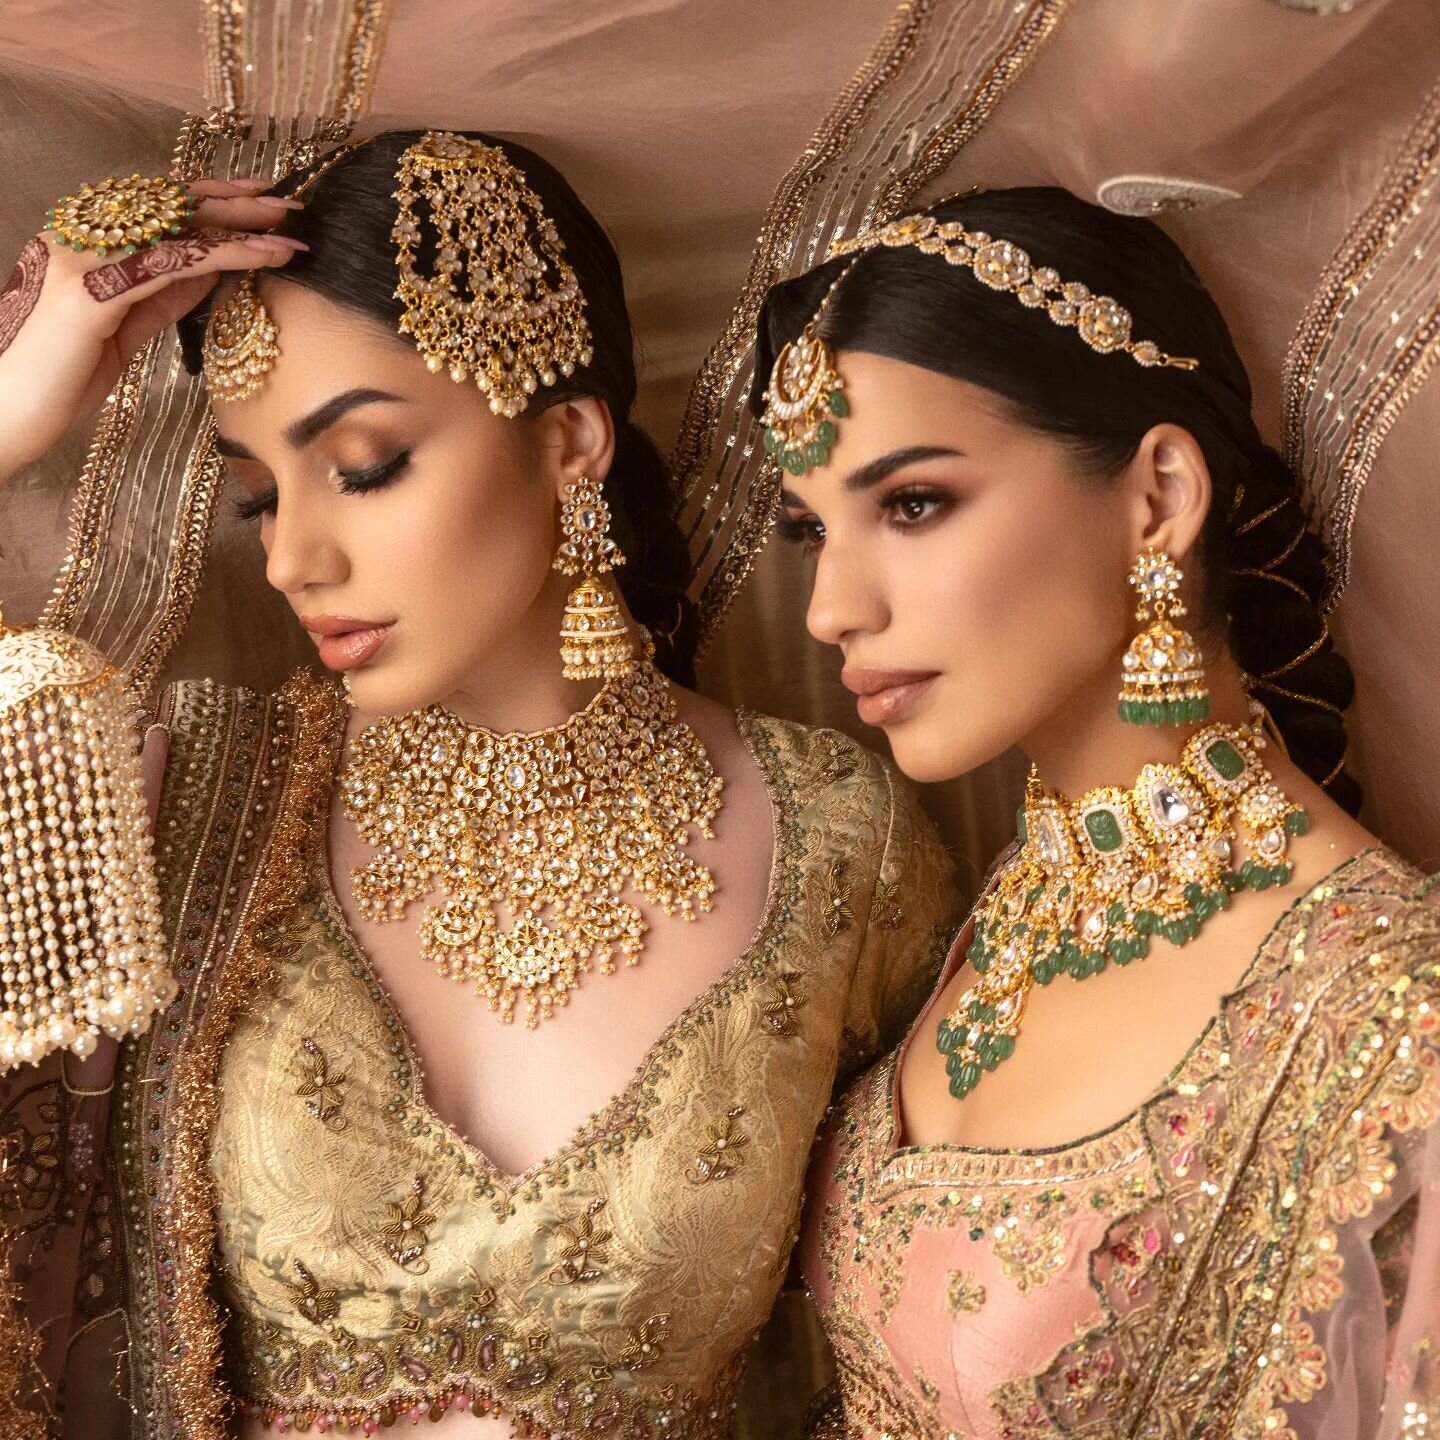 024 Campaign for our new collection &hearts;️
We have so many new designs available in all styles of jewellery. 

DM to book an appointment. We ship worldwide. 

Photographer: @omjphotography 
Makeup: @dilmatharubeauty 
Stylist: @zafshabir @thecactus